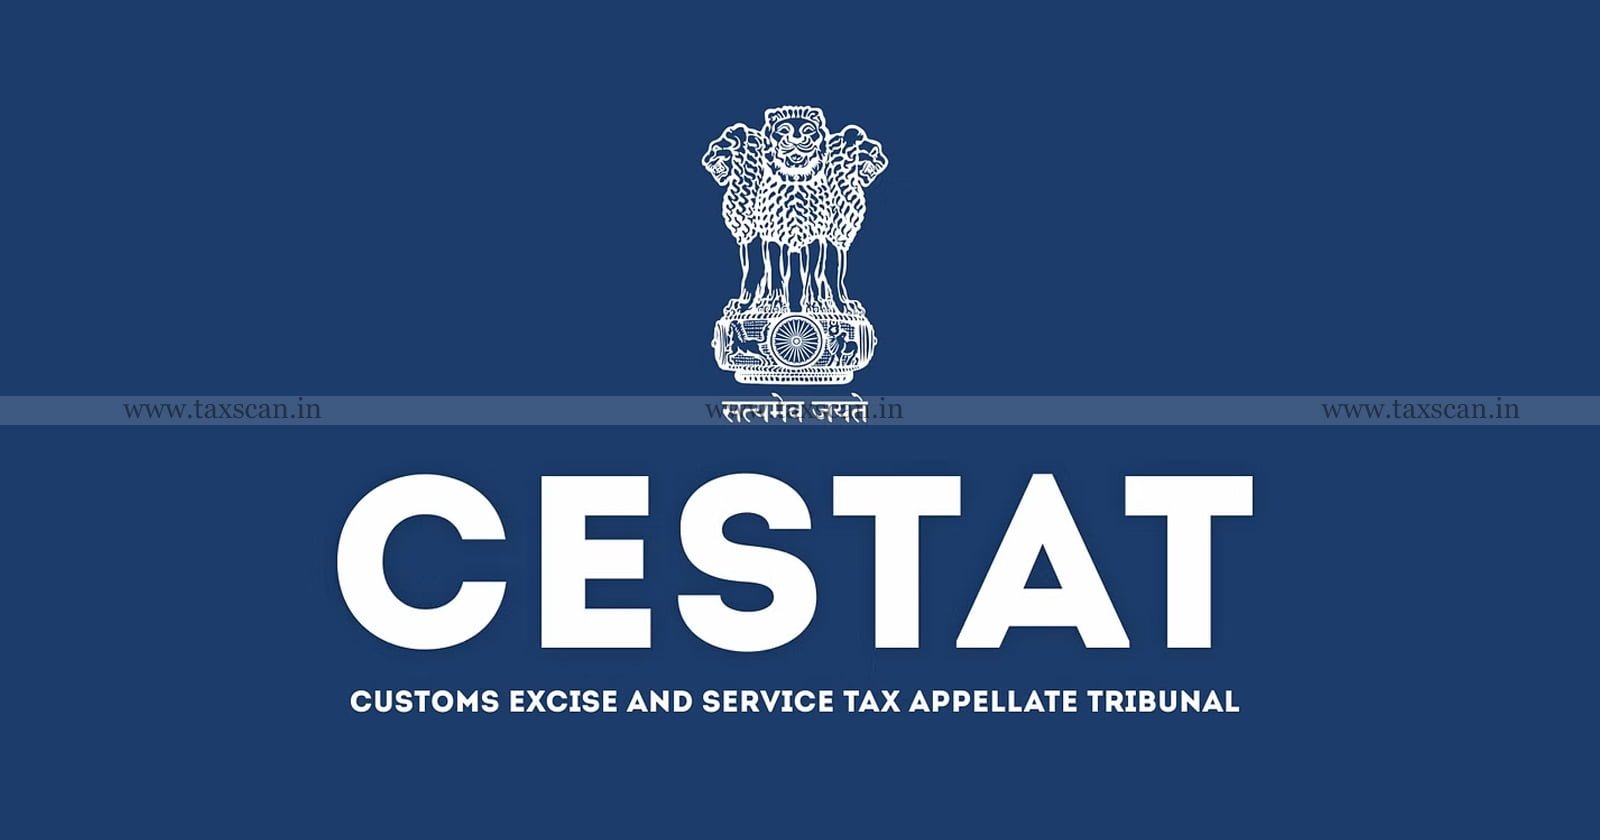 Place of Service of Business - commerce should be the location of Service of Recipient - CESTAT - TAXSCAN